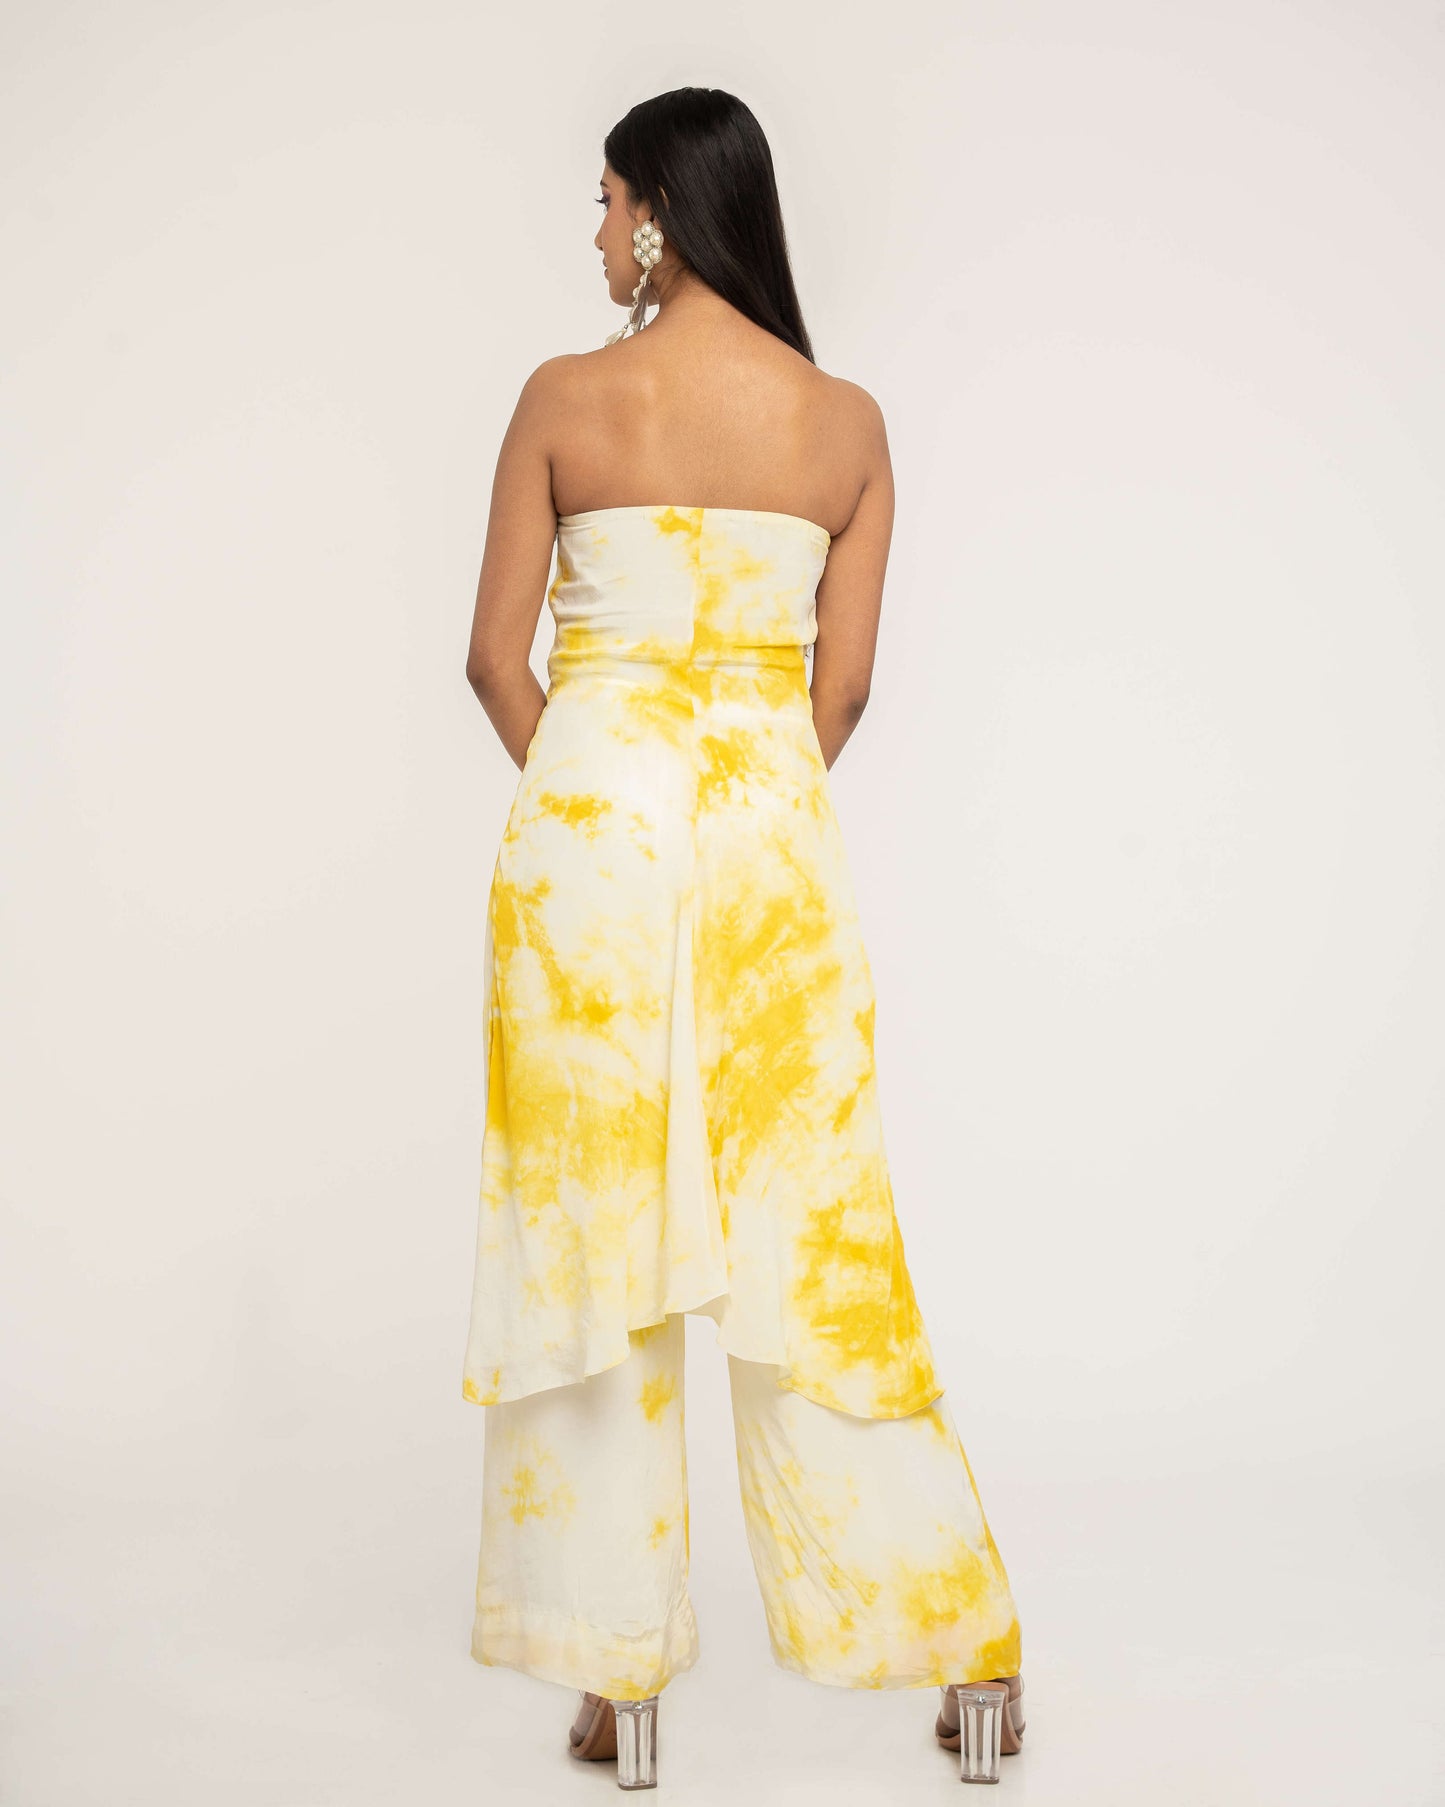 The Haldi Set consists of a strapless dress with high-waisted, elastic pants. 